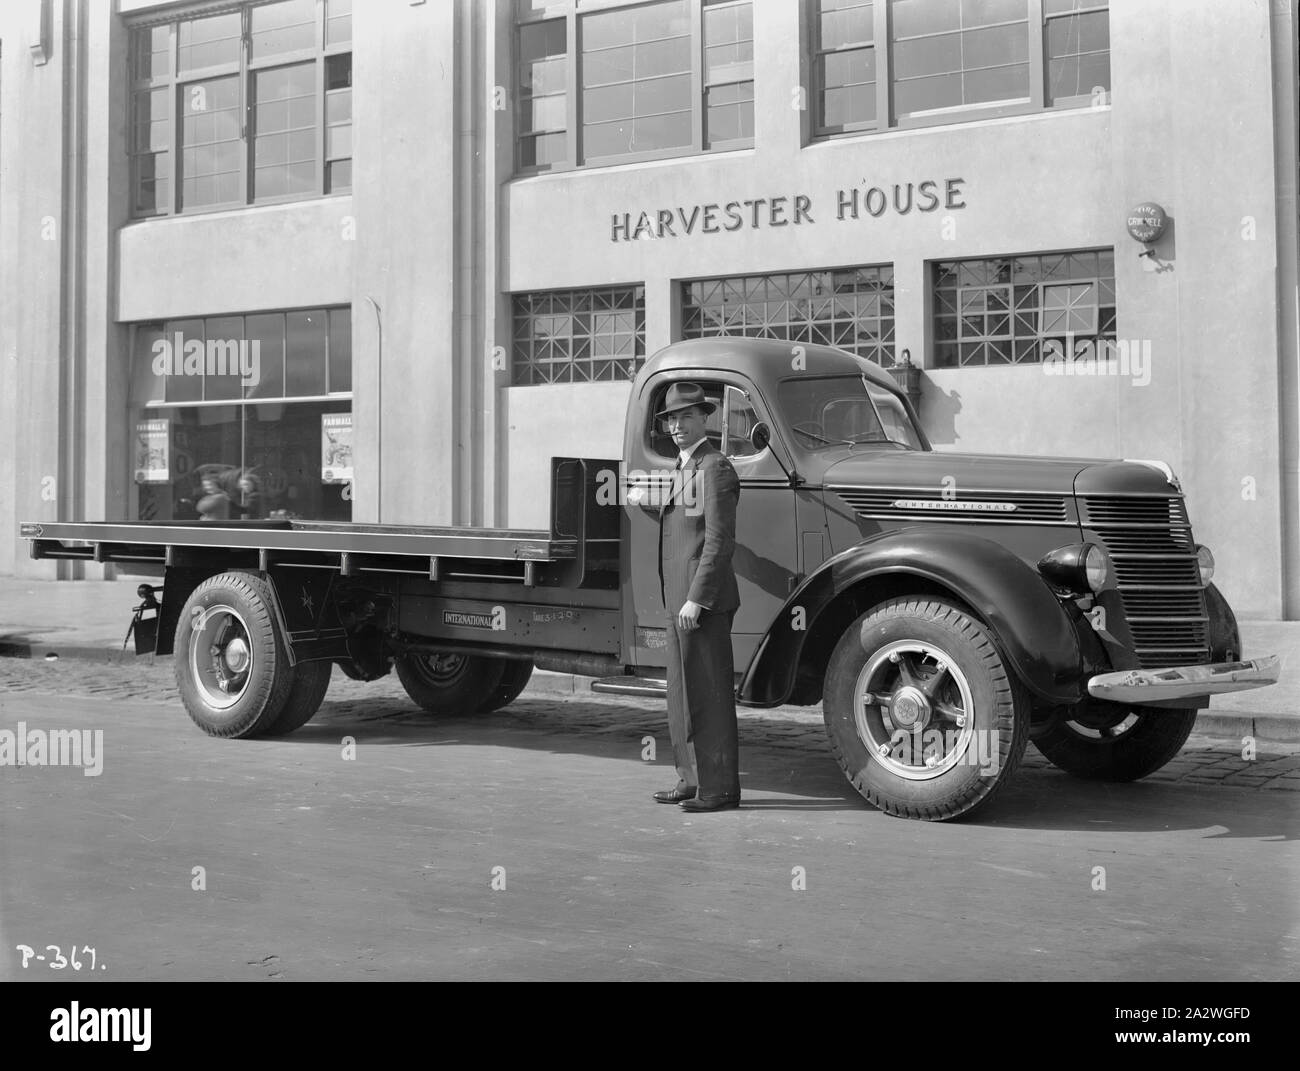 Negative - International Harvester, Keith Rigg & D40 Truck Outside Harvester House, City Road, South Melbourne, 1940, Part of a large collection of glass plate and film negatives, transparencies, photo albums, product catalogues, videos, motion picture films, company journals, advertisements and newspaper cuttings relating to the operations of the International Harvester Company and its subsidiaries in Australia. The International Harvester Company of America was formed in 1902 by the merger of five leading Stock Photo